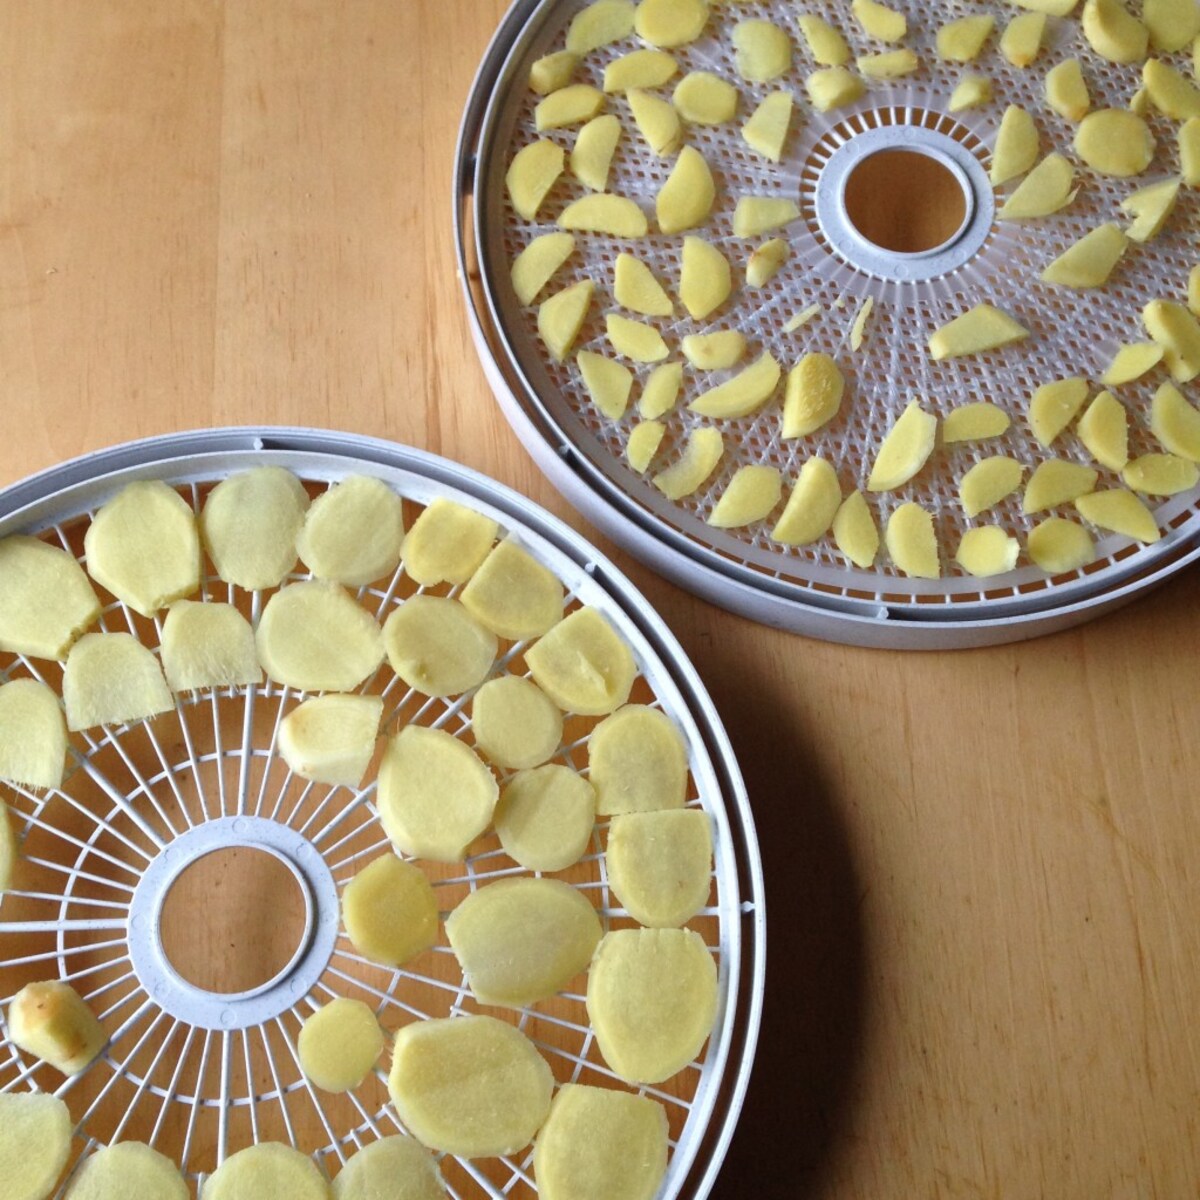 How To Dehydrate Ginger In A Dehydrator